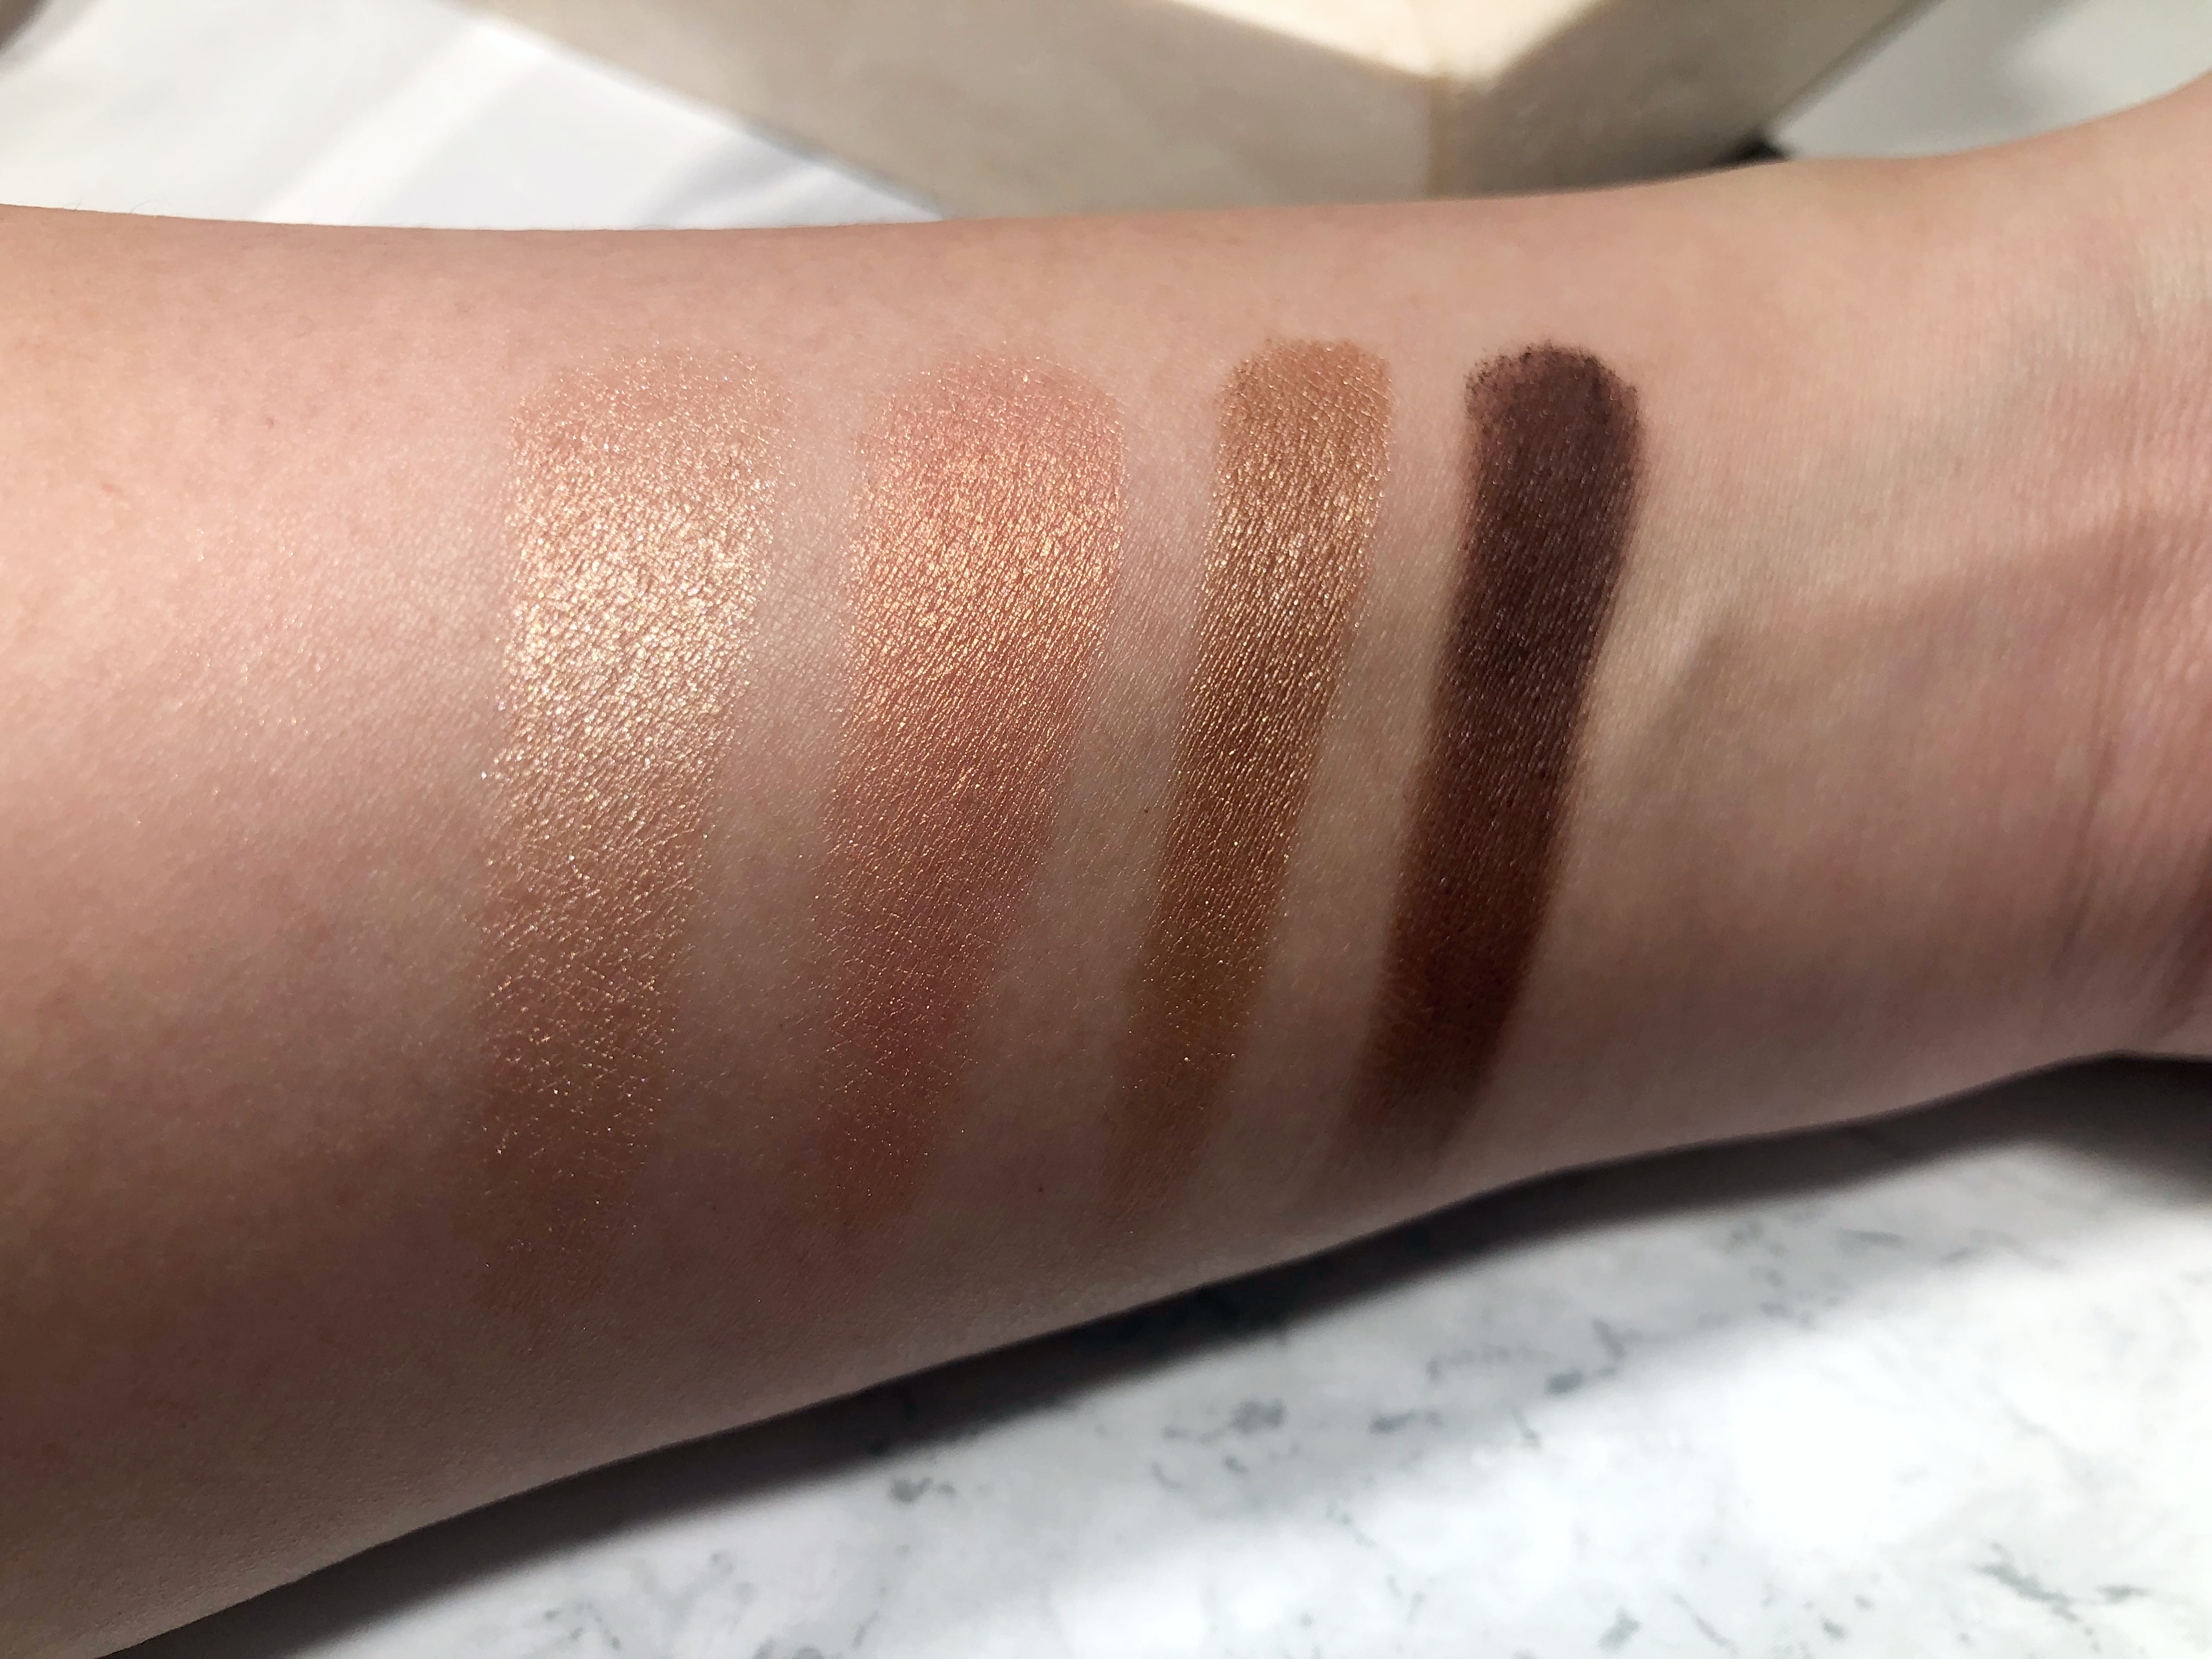 Tom Ford Eye Color Crème Eyeshadow Quad Review and Swatches